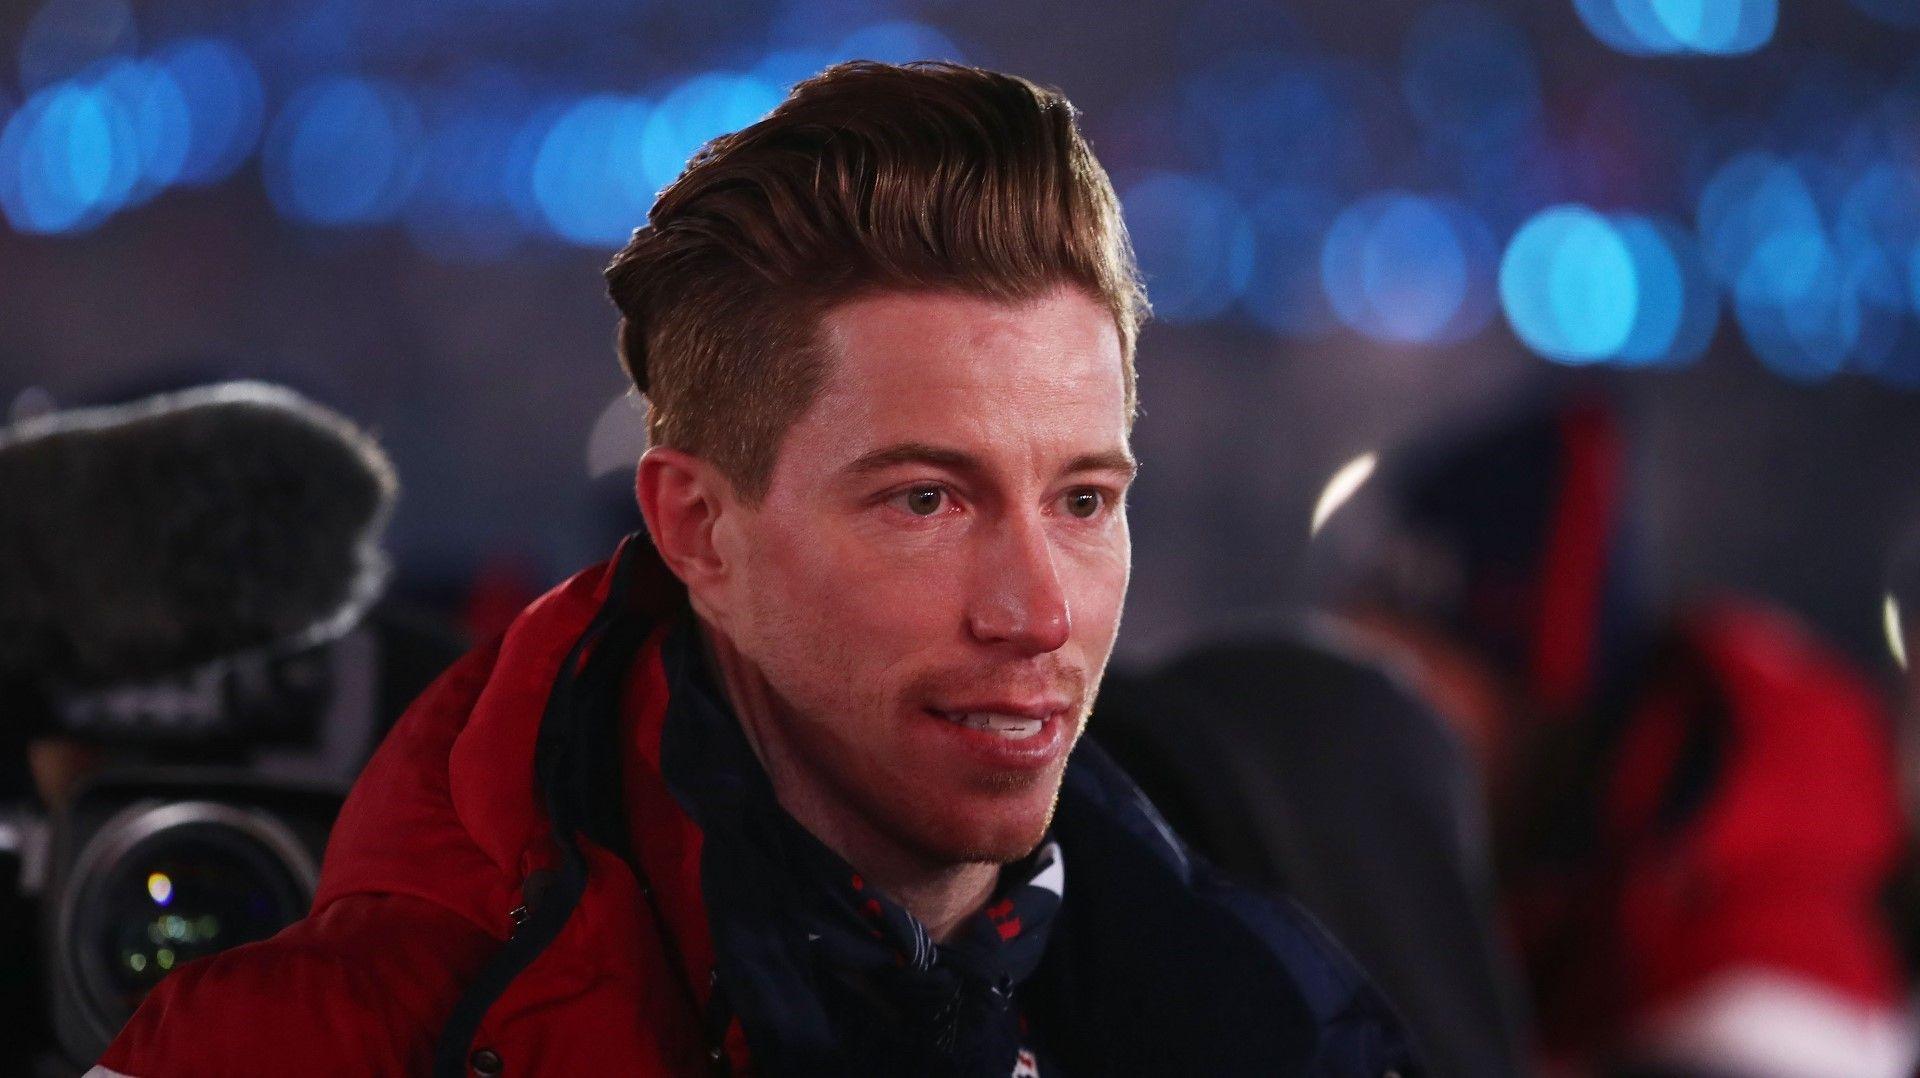 12news.com. How old is Shaun White?